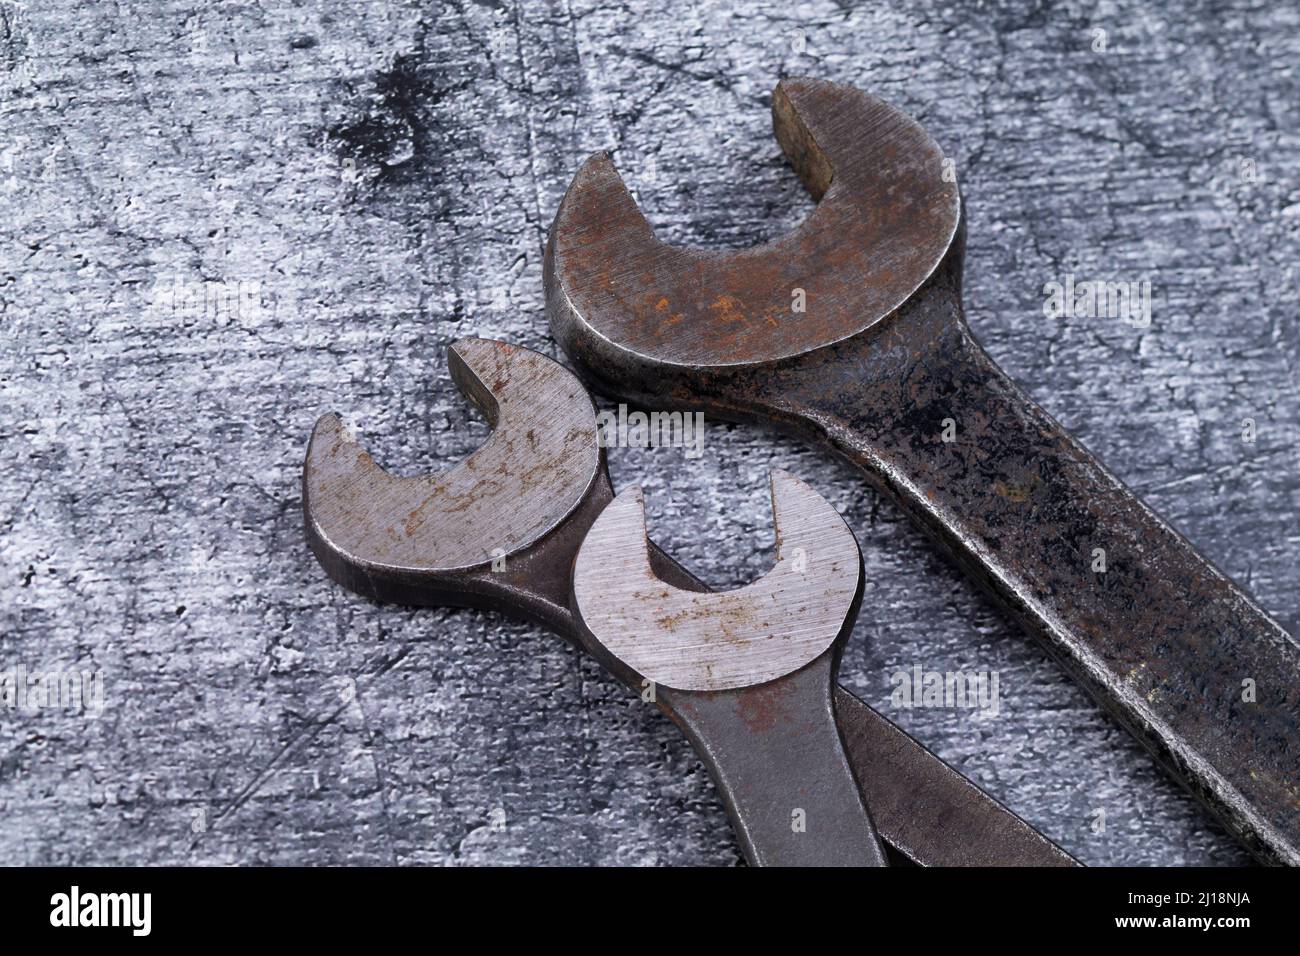 The photo shows various rusty wrenches on a gray background Stock Photo